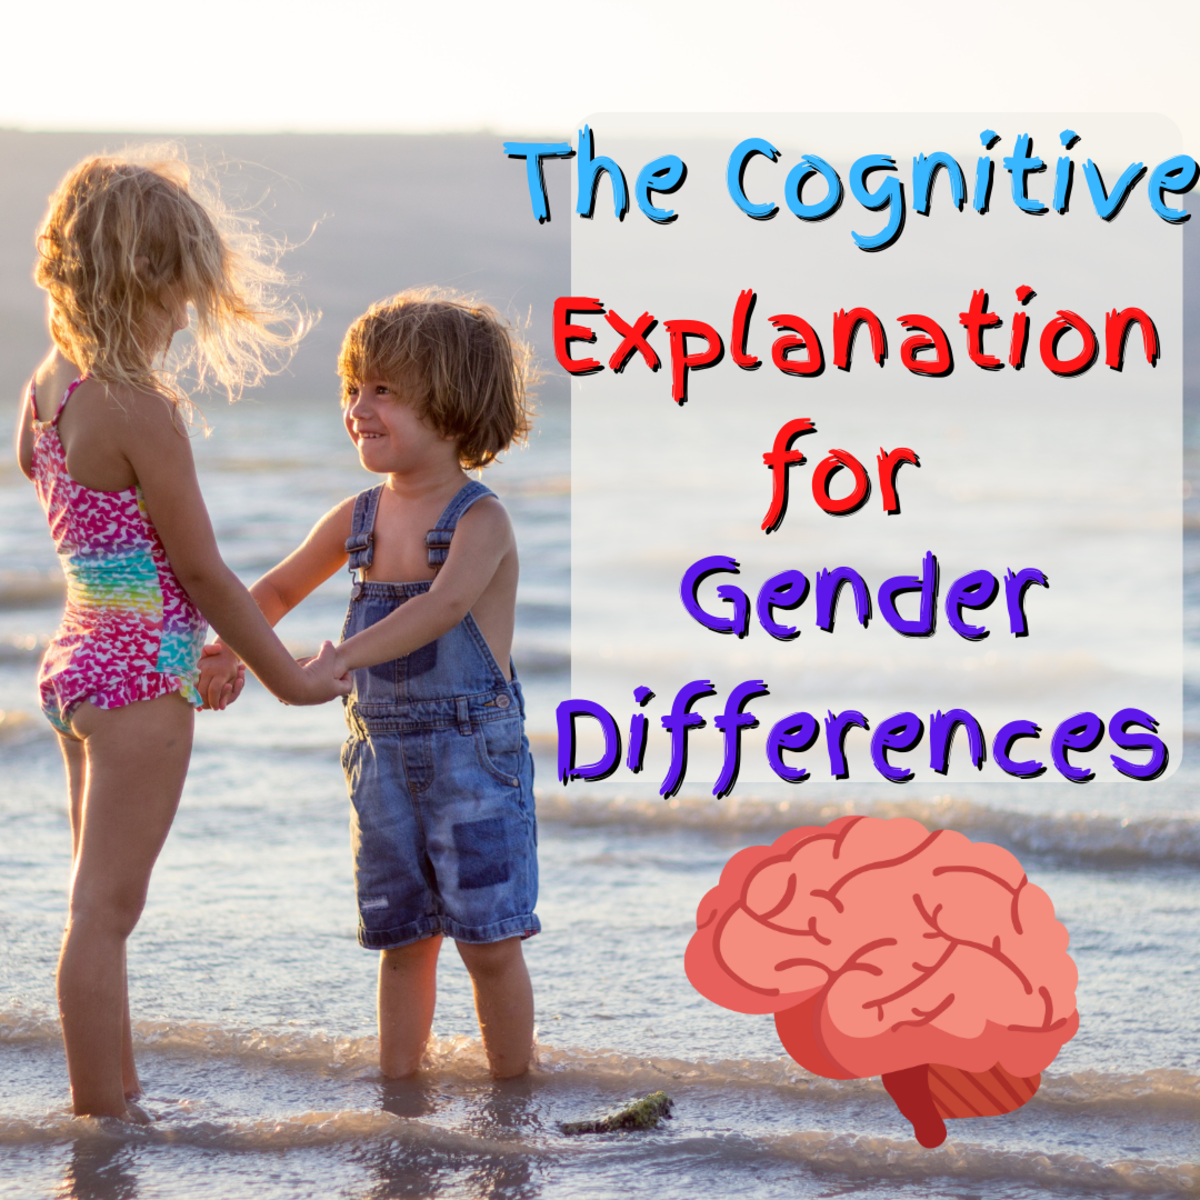 The Cognitive Approach to Gender Differences